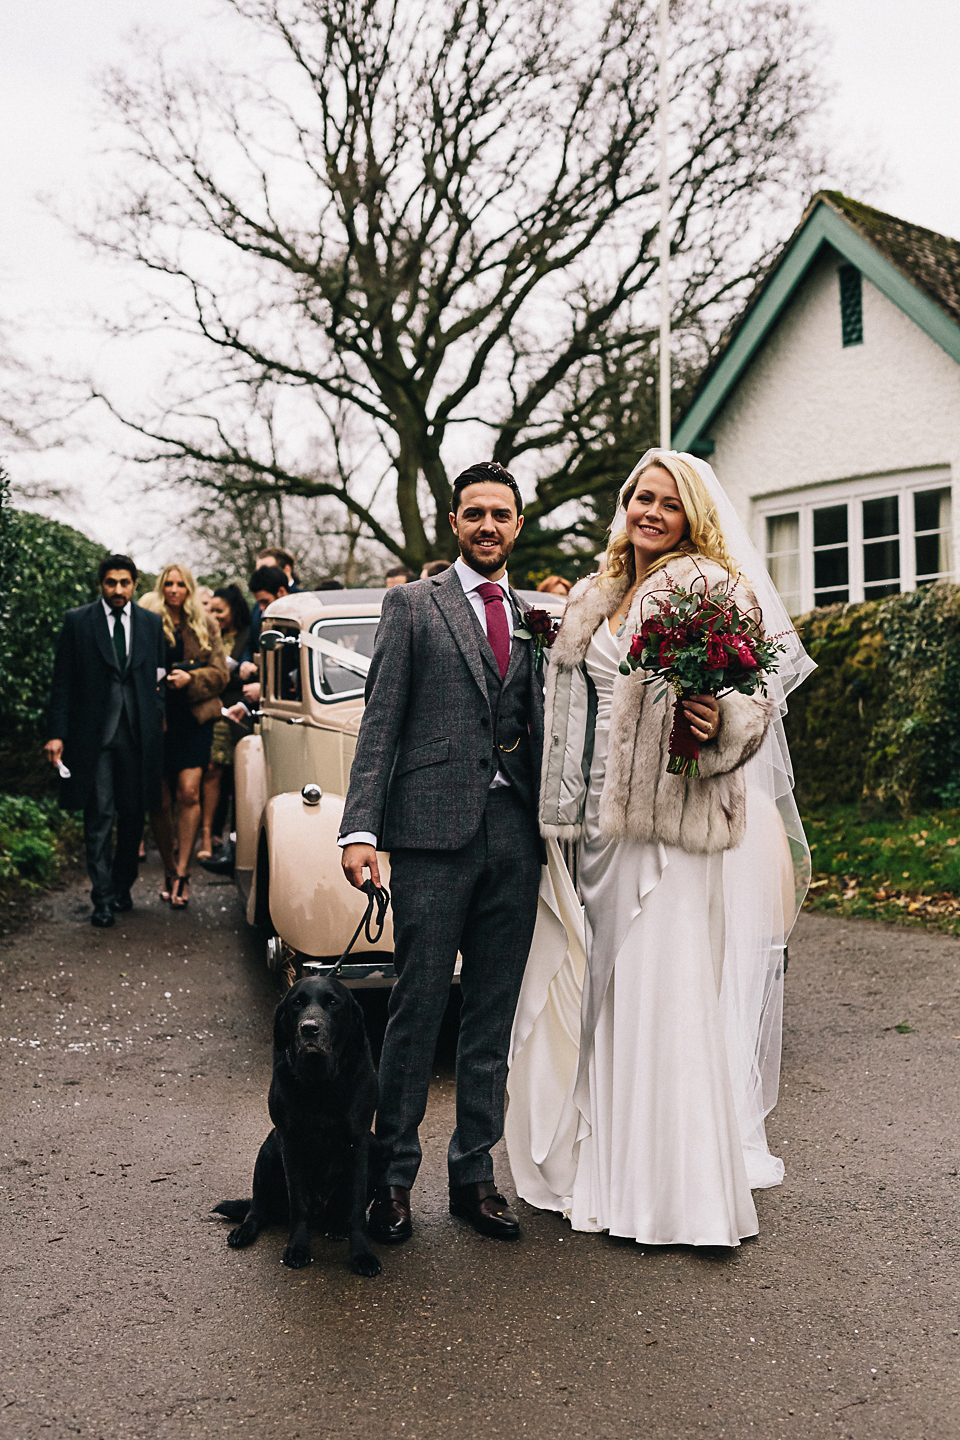 A Suzanne Neville gown for a 1940's Goodwood Vintage inspired winter wedding. Images by Eclection Photography.